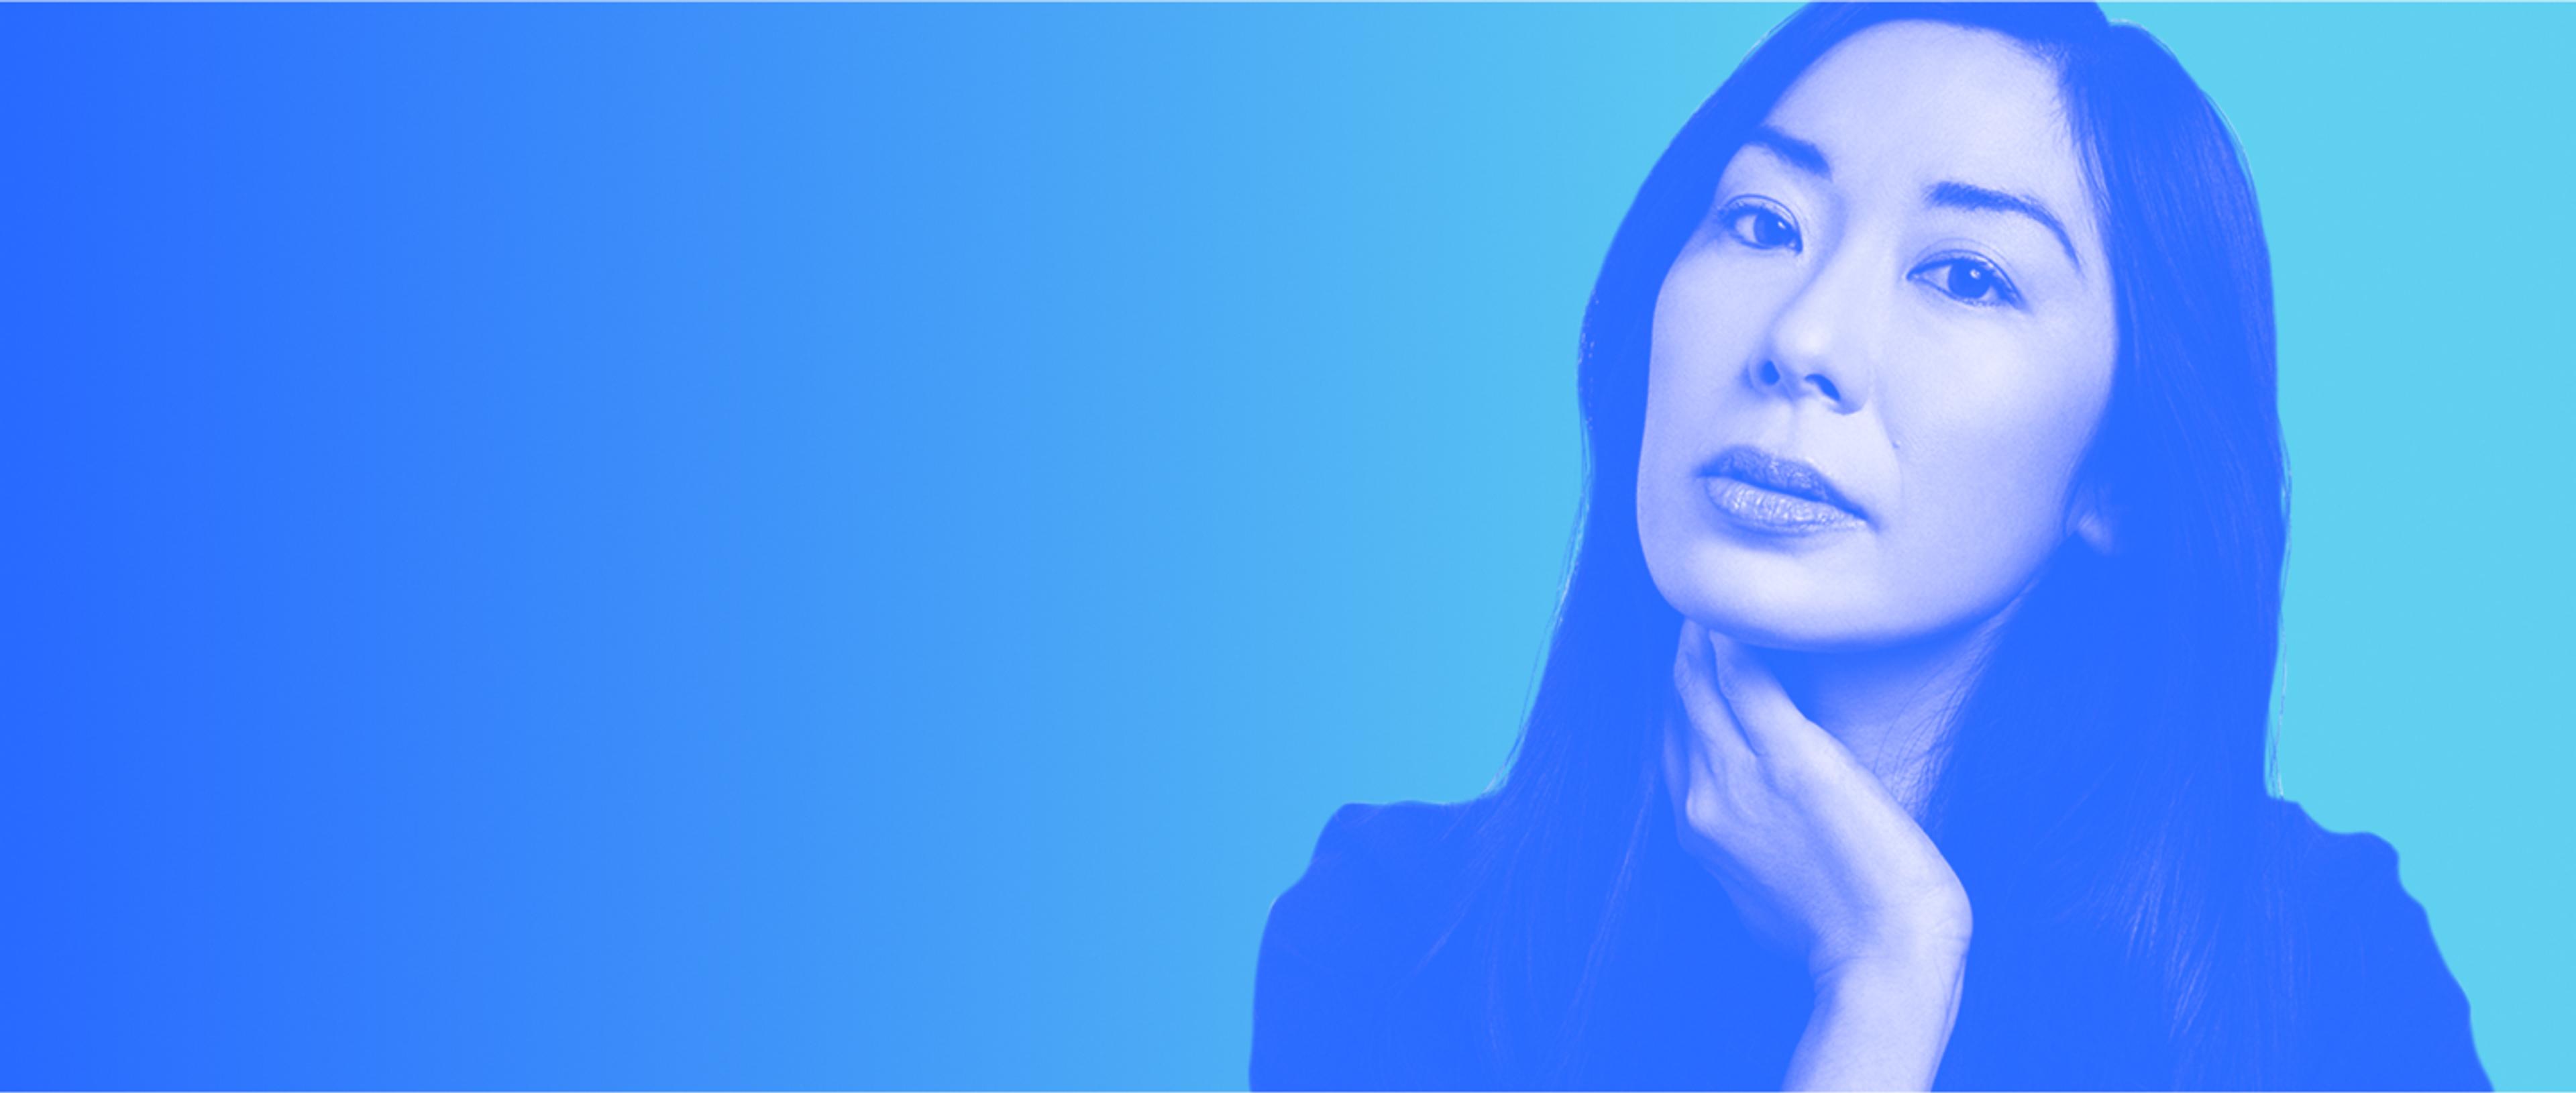 Katie Kitamura on the charismatic nature of power and her new novel, "Intimacies".